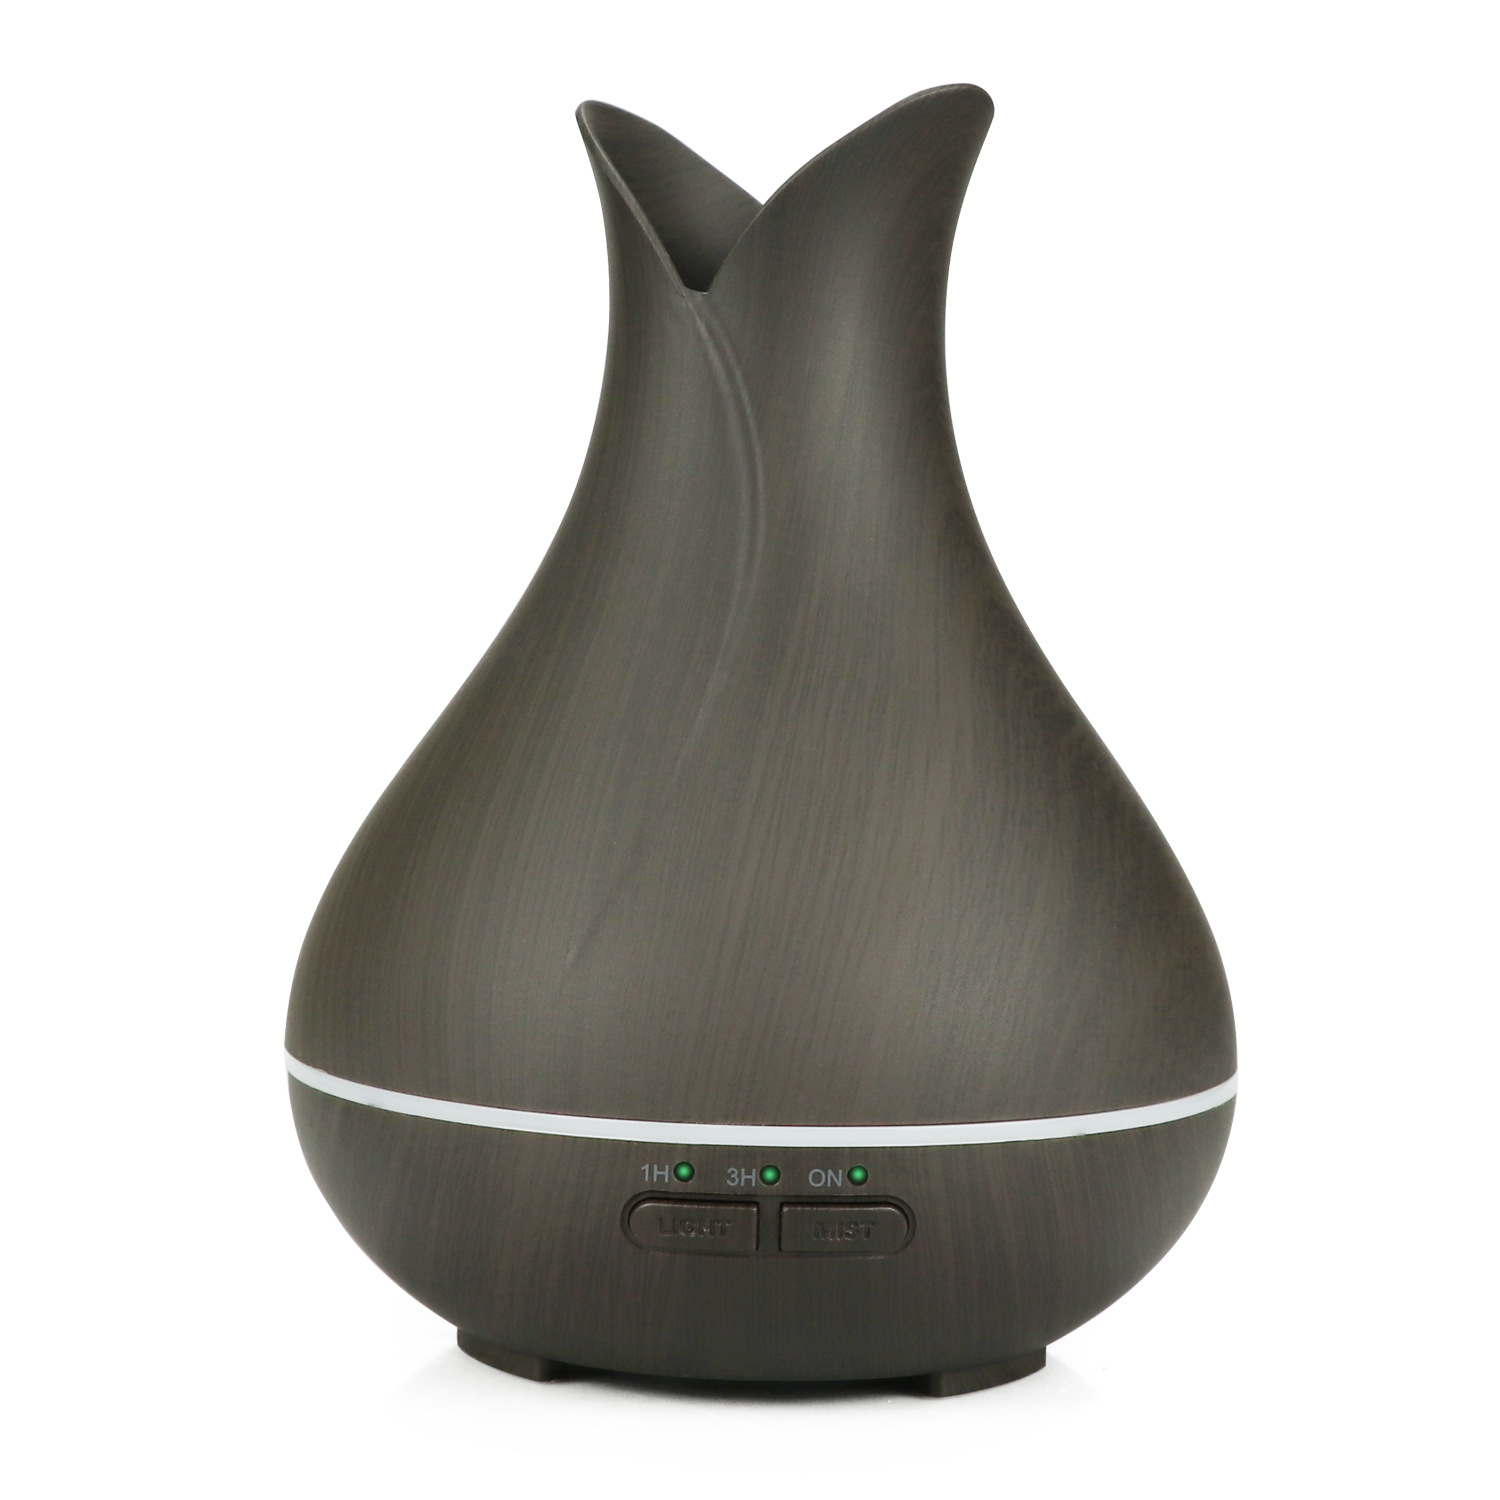 OEM/ODM Supplier China Ultrasonic Scent Fragrance Humidifier Aroma Essential Oil Air Diffuser Machine 120ml